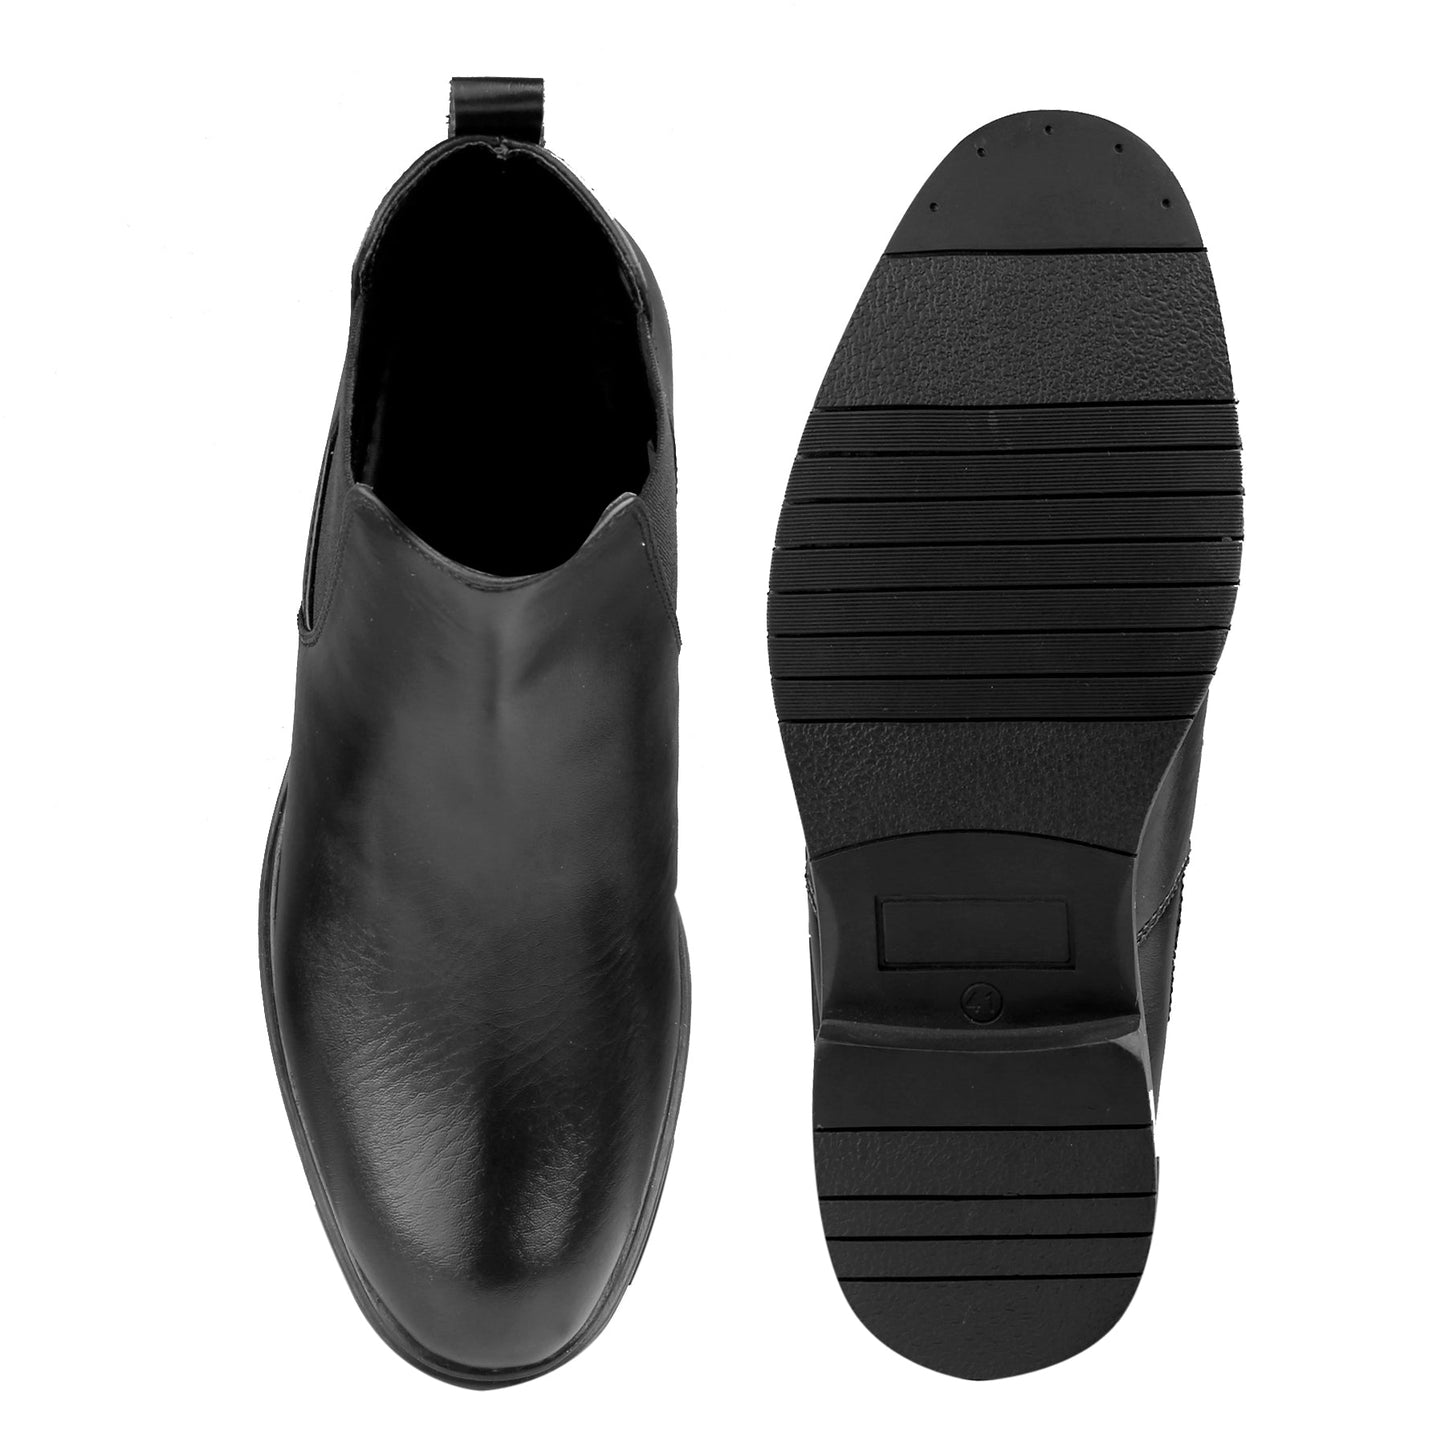 Bxxy's Stylish And Comfortable Slip-on Chelsea Boots